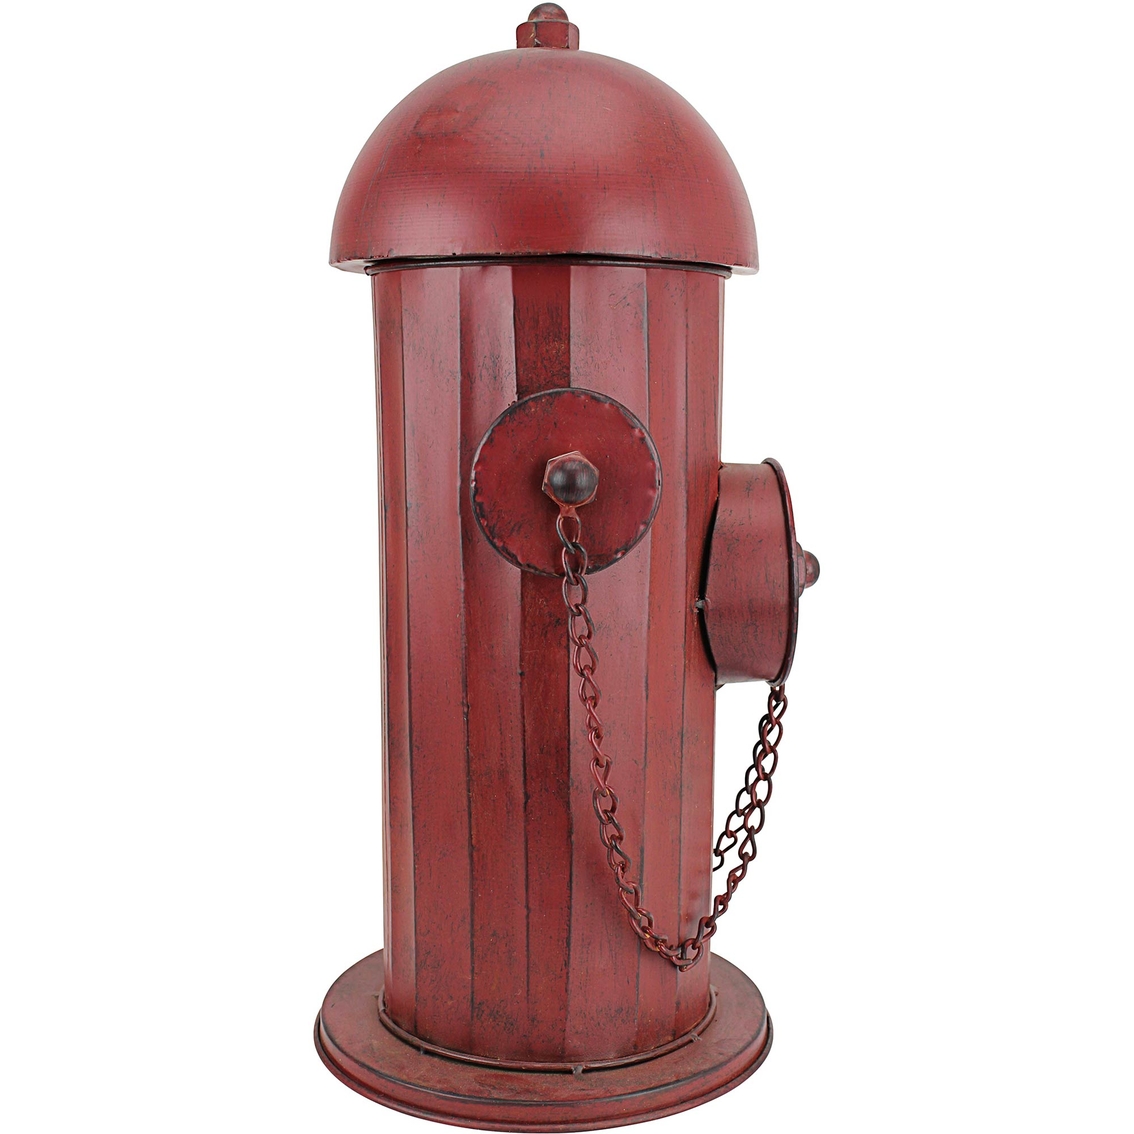 Design Toscano Vintage Metal Fire Hydrant Statue - Image 2 of 4